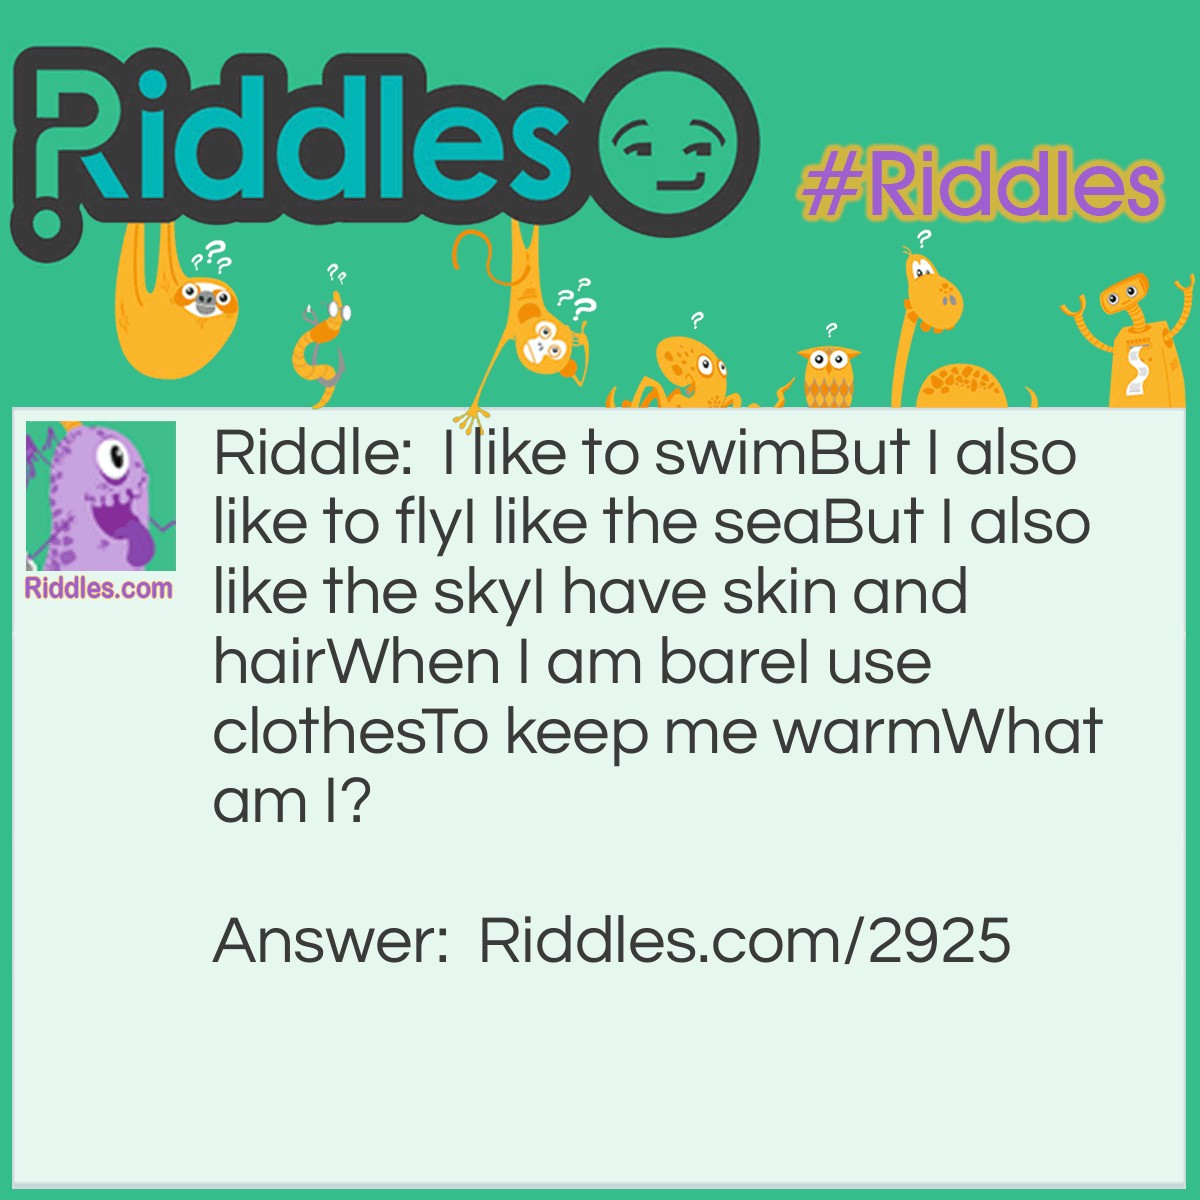 Riddle: I like to swim But I also like to fly I like the sea But I also like the sky I have skin and hair When I am bare I use clothes To keep me warm.  What am I? Answer: A human swimming in the sea And a human flying in an airplane.